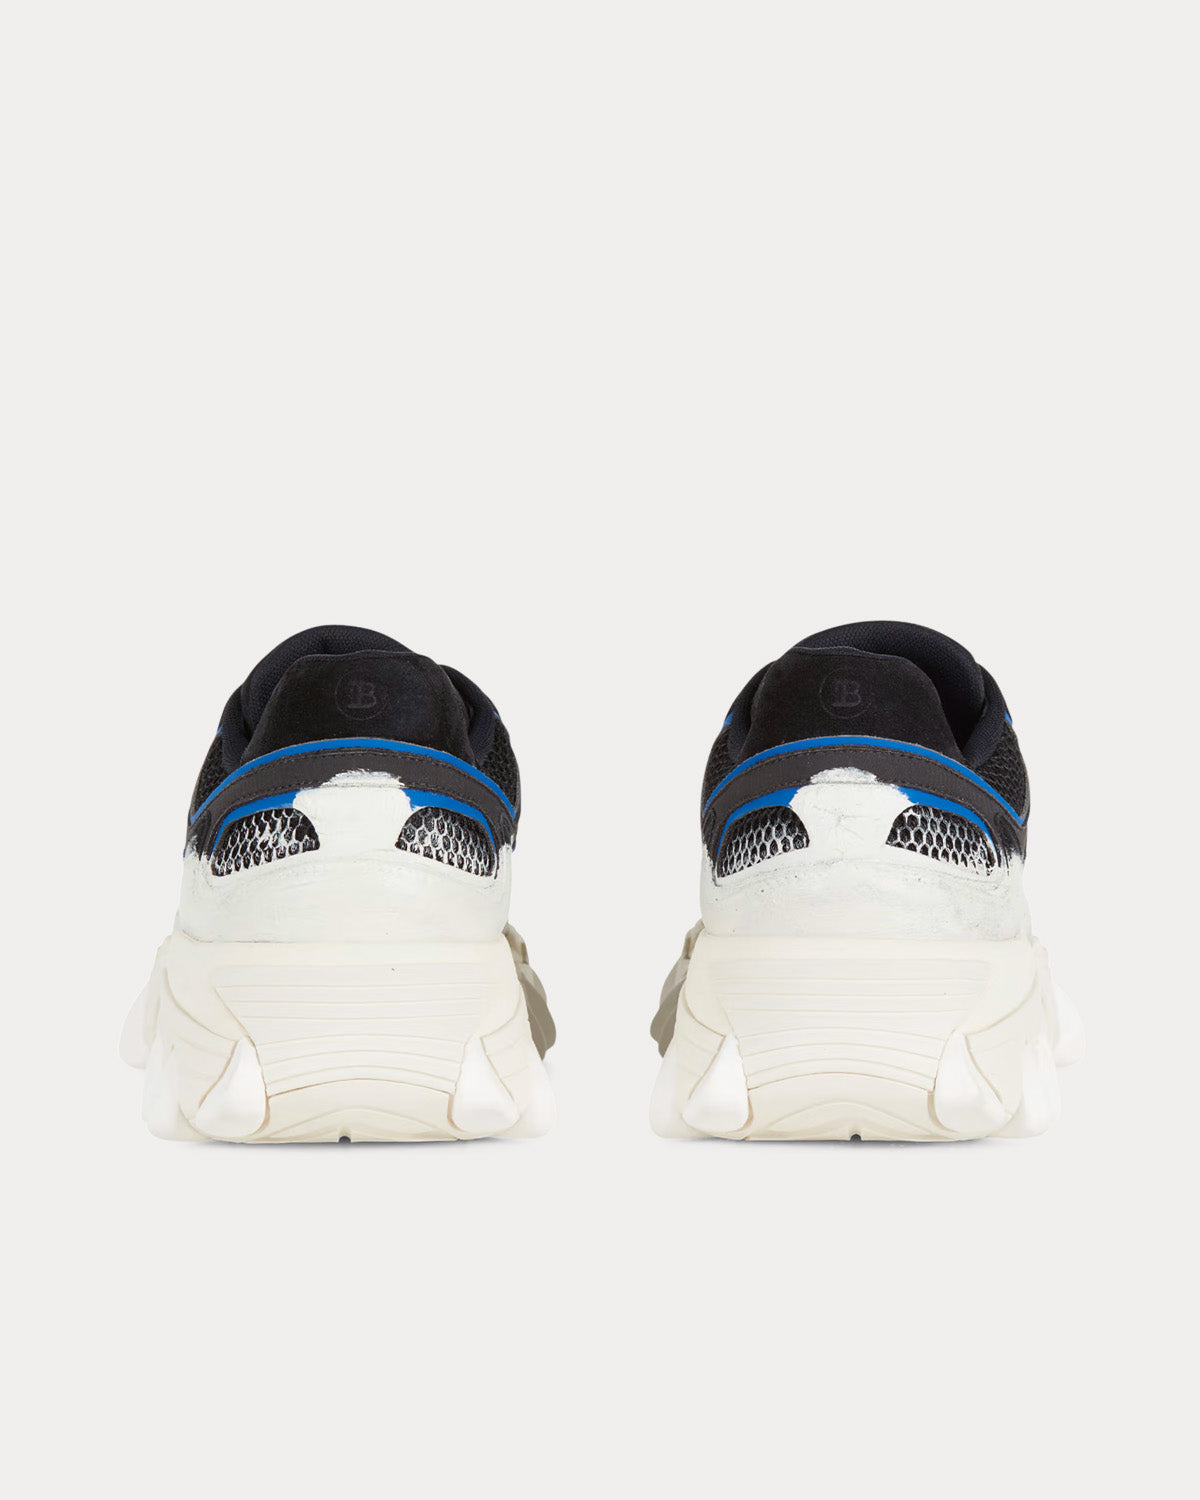 Balmain - B-East Leather, Suede & Mesh Black / Blue / White Low Top Sneakers